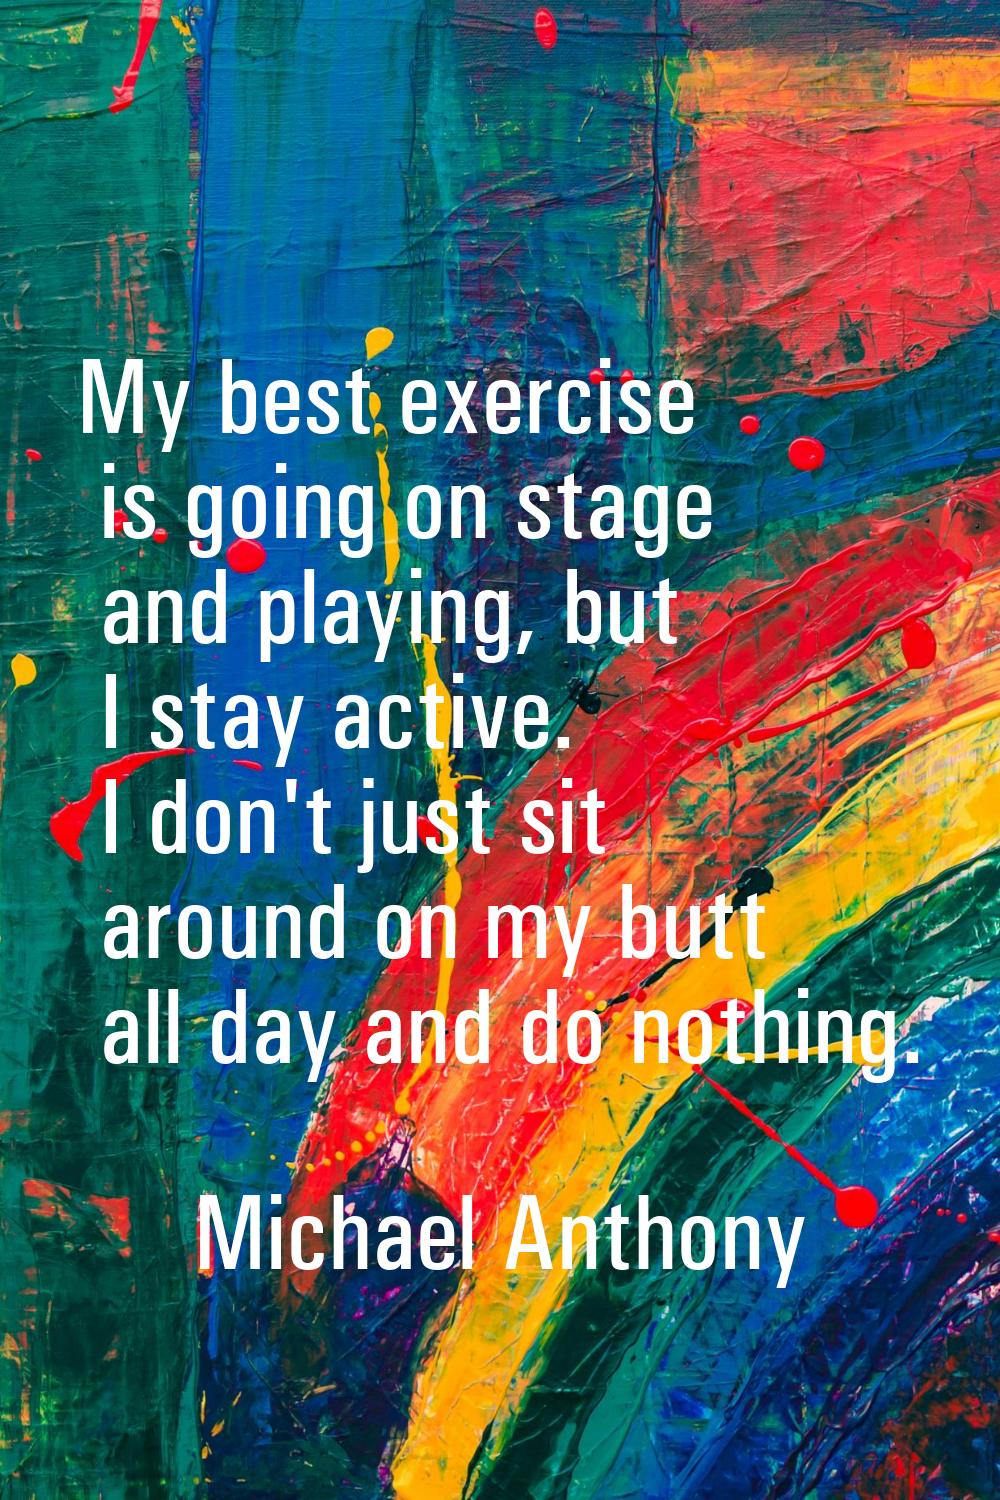 My best exercise is going on stage and playing, but I stay active. I don't just sit around on my bu